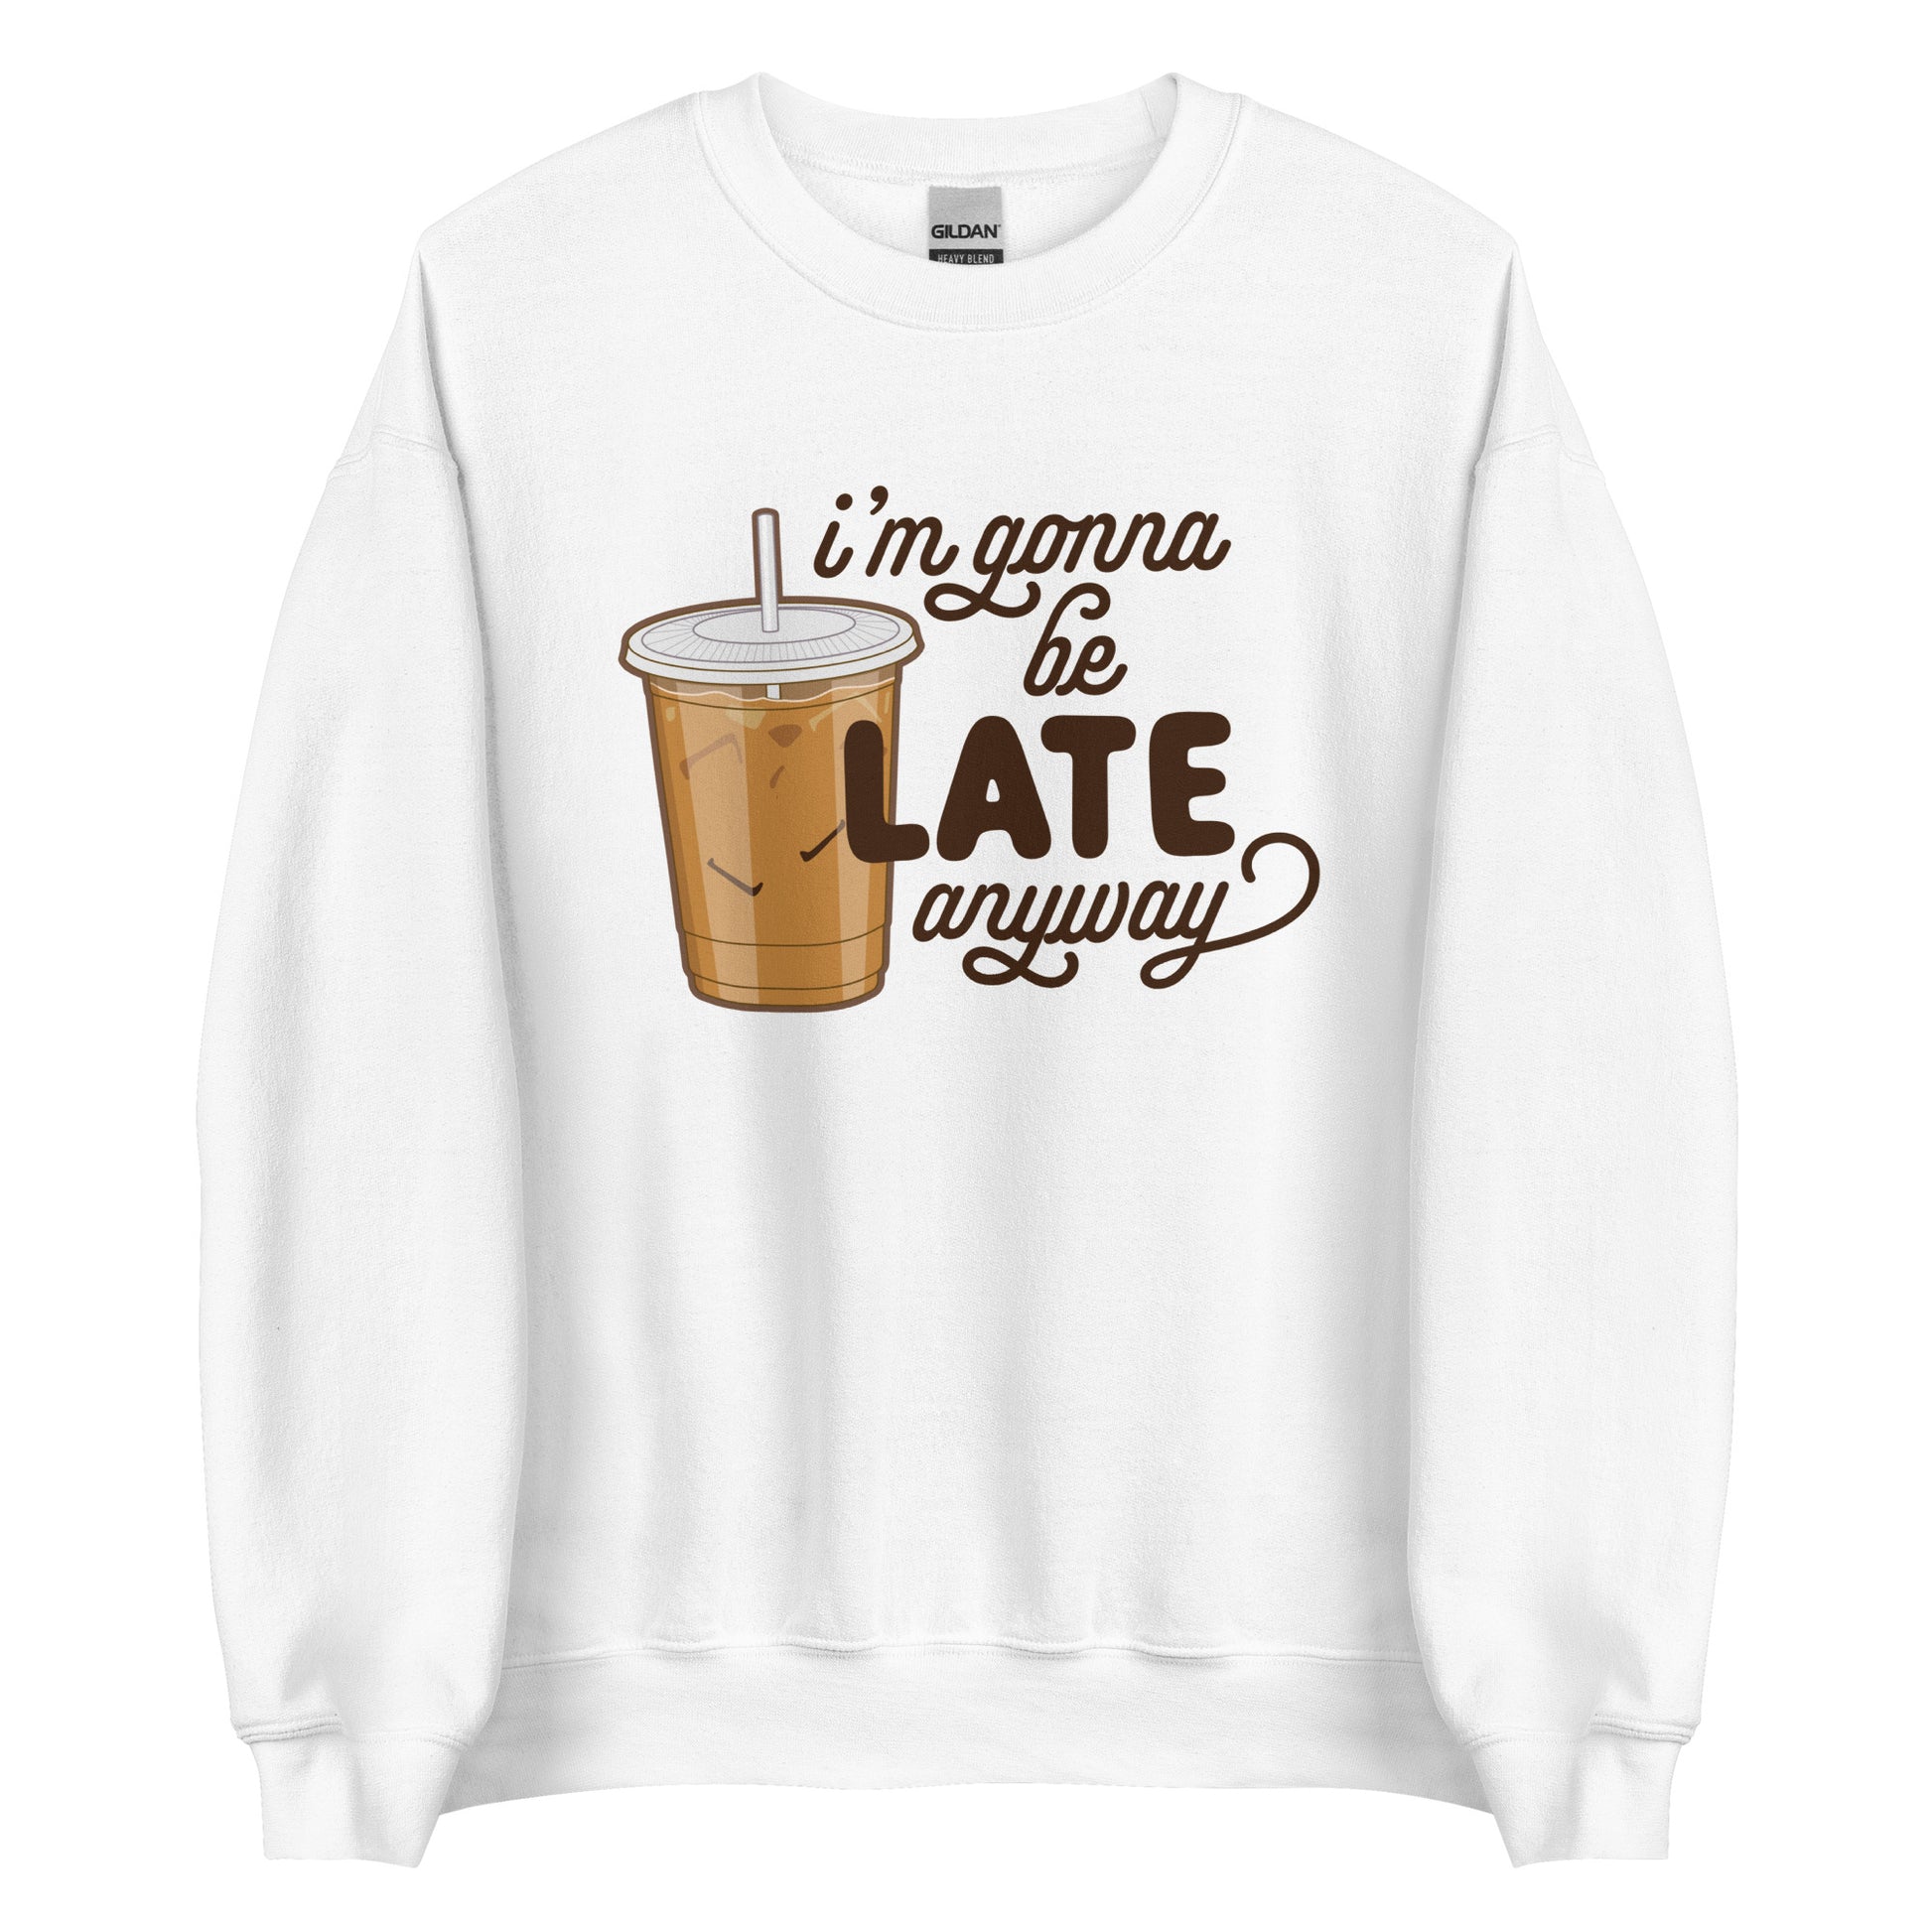 A white crewneck sweatshirt featuring an illustration of iced coffee. Text next to the coffee reads "I'm gonna be LATE anyway".